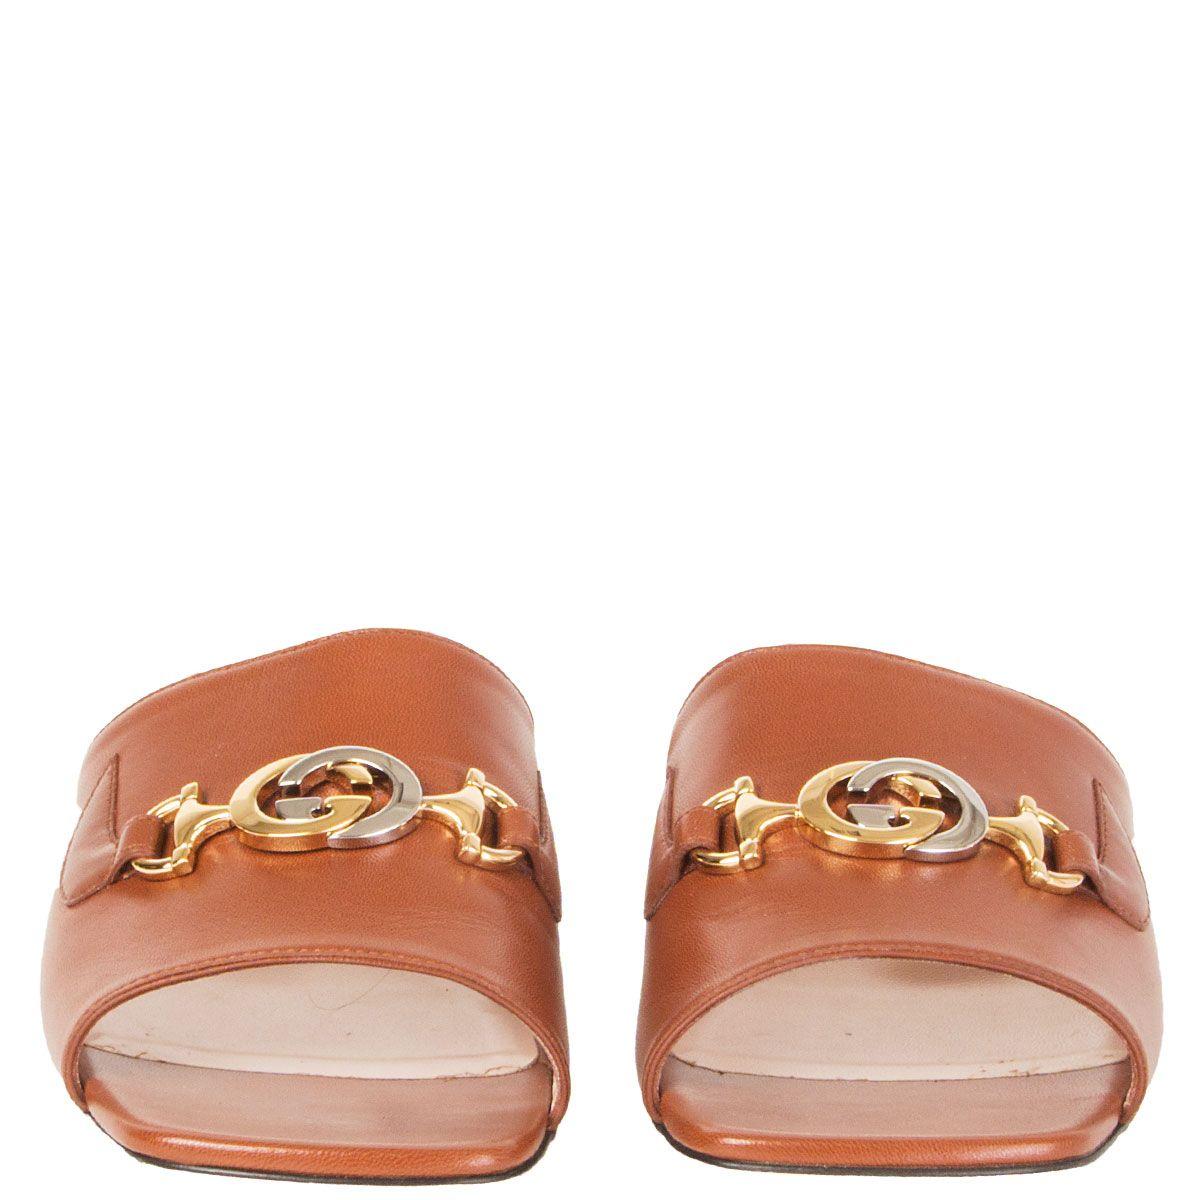 100% authentic Gucci Zumi slip-on sandals in brown calfskin – named for house muse Zumi Roscow. They feature a low block heel and interlocking G Horsebit decoration in silver-tone and golden hardware. Have been worn once and are in excellent